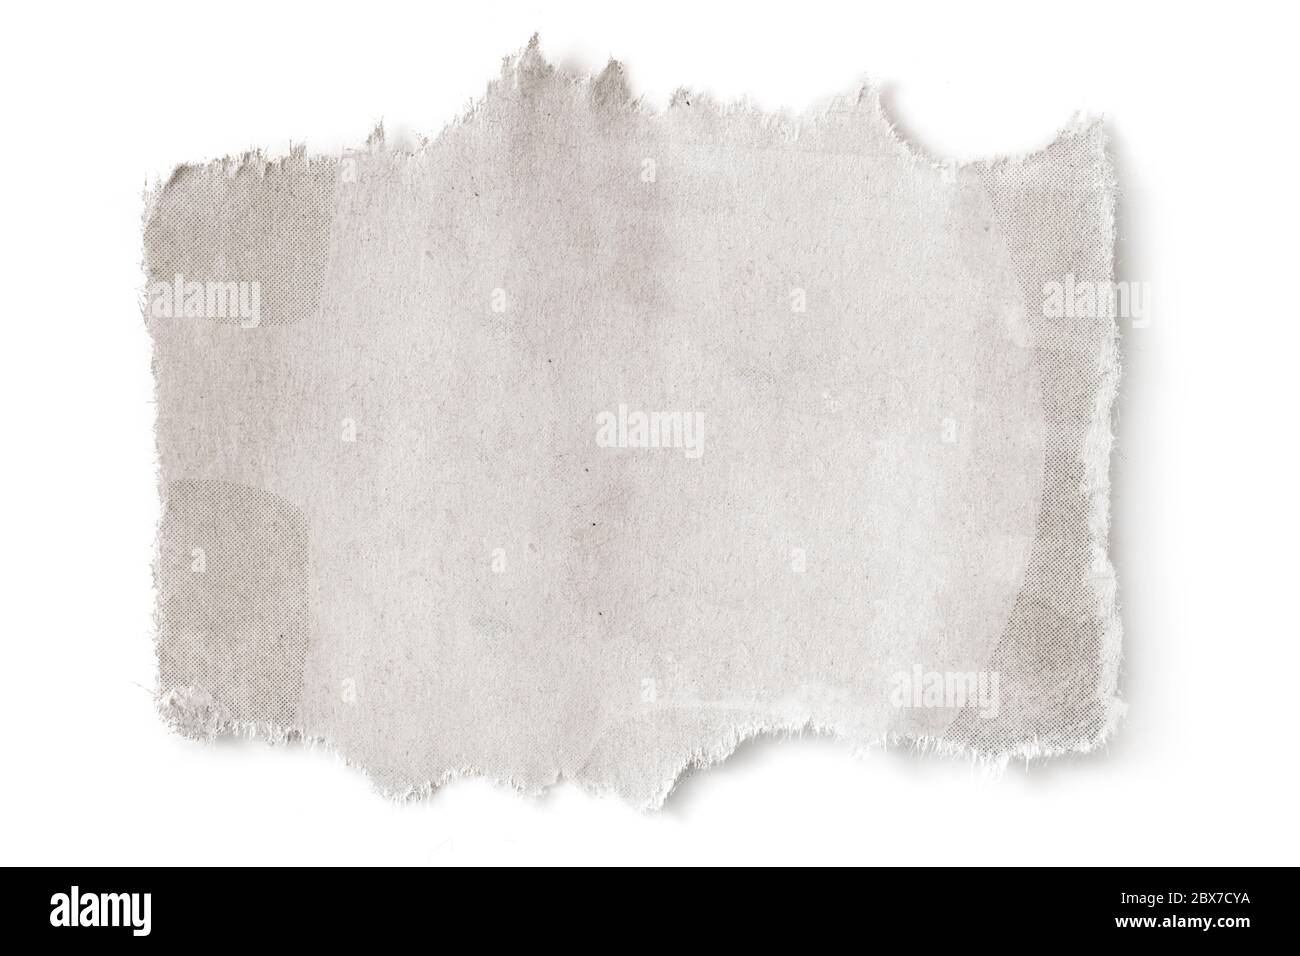 Torn blank paper with copyspace, isolated on white with soft shadow. Stock Photo